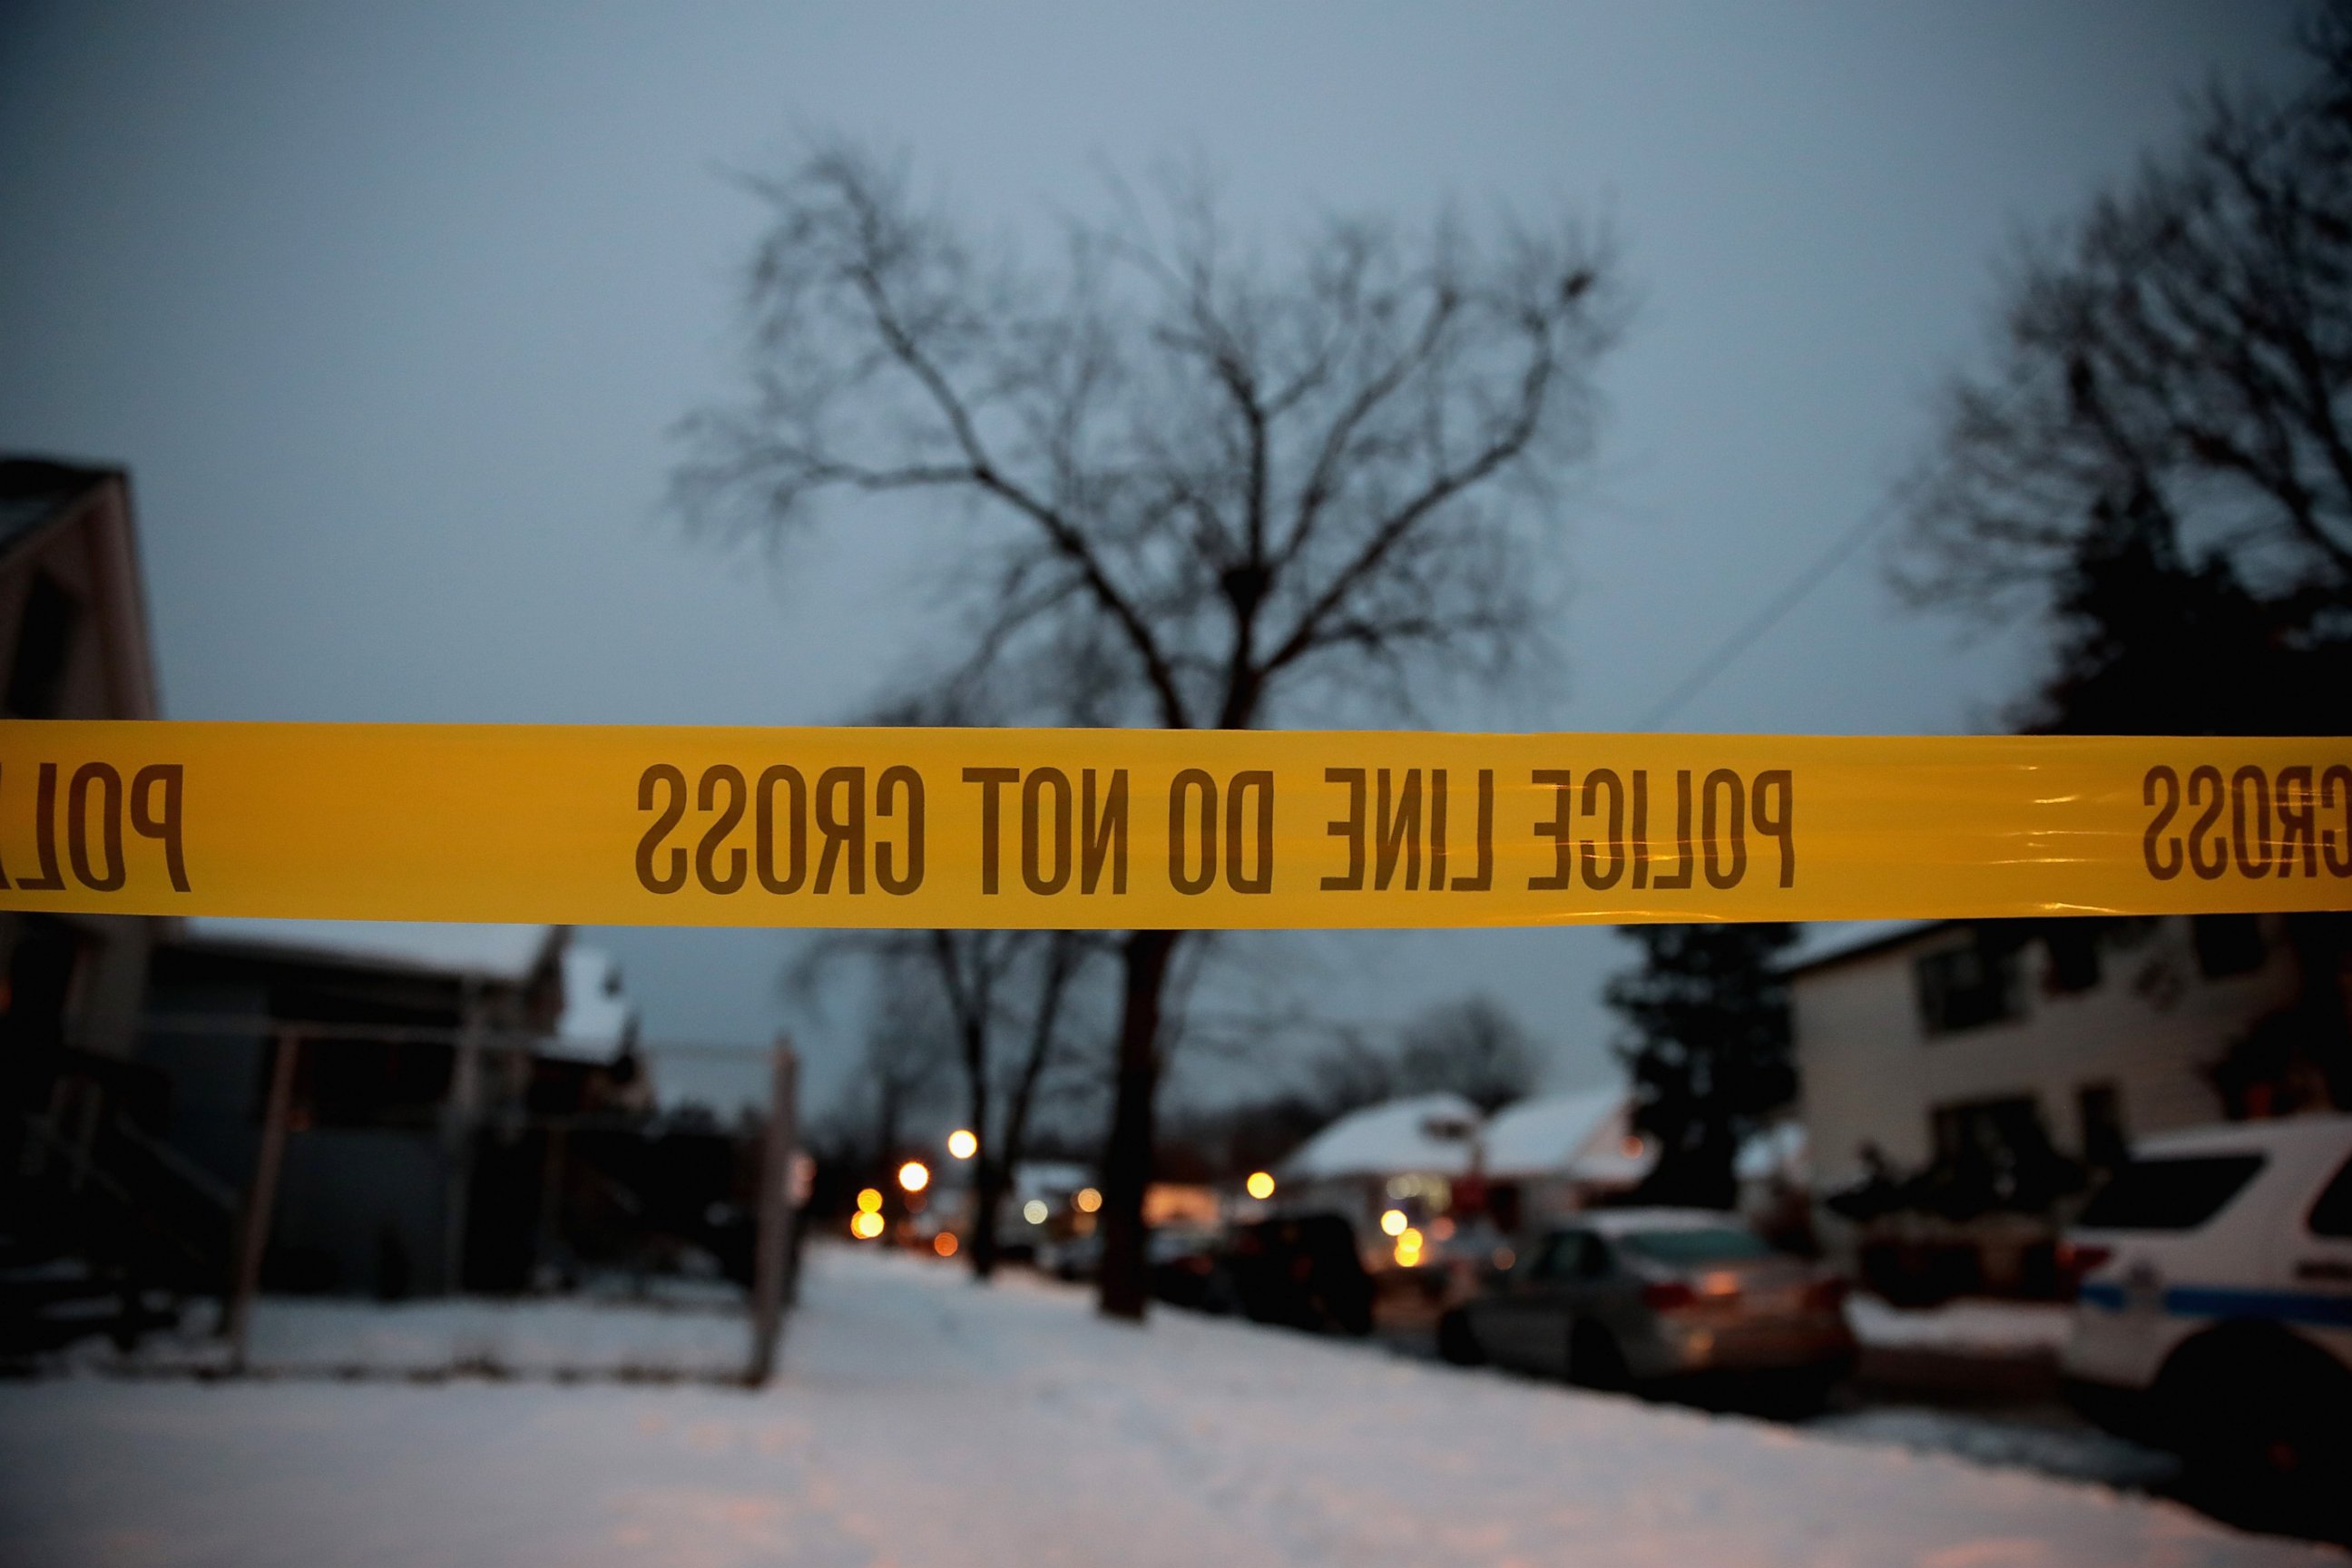 PHOTO: Police investigate the scene of a quadruple homicide on the city's southside, Dec. 17, 2016 in Chicago.